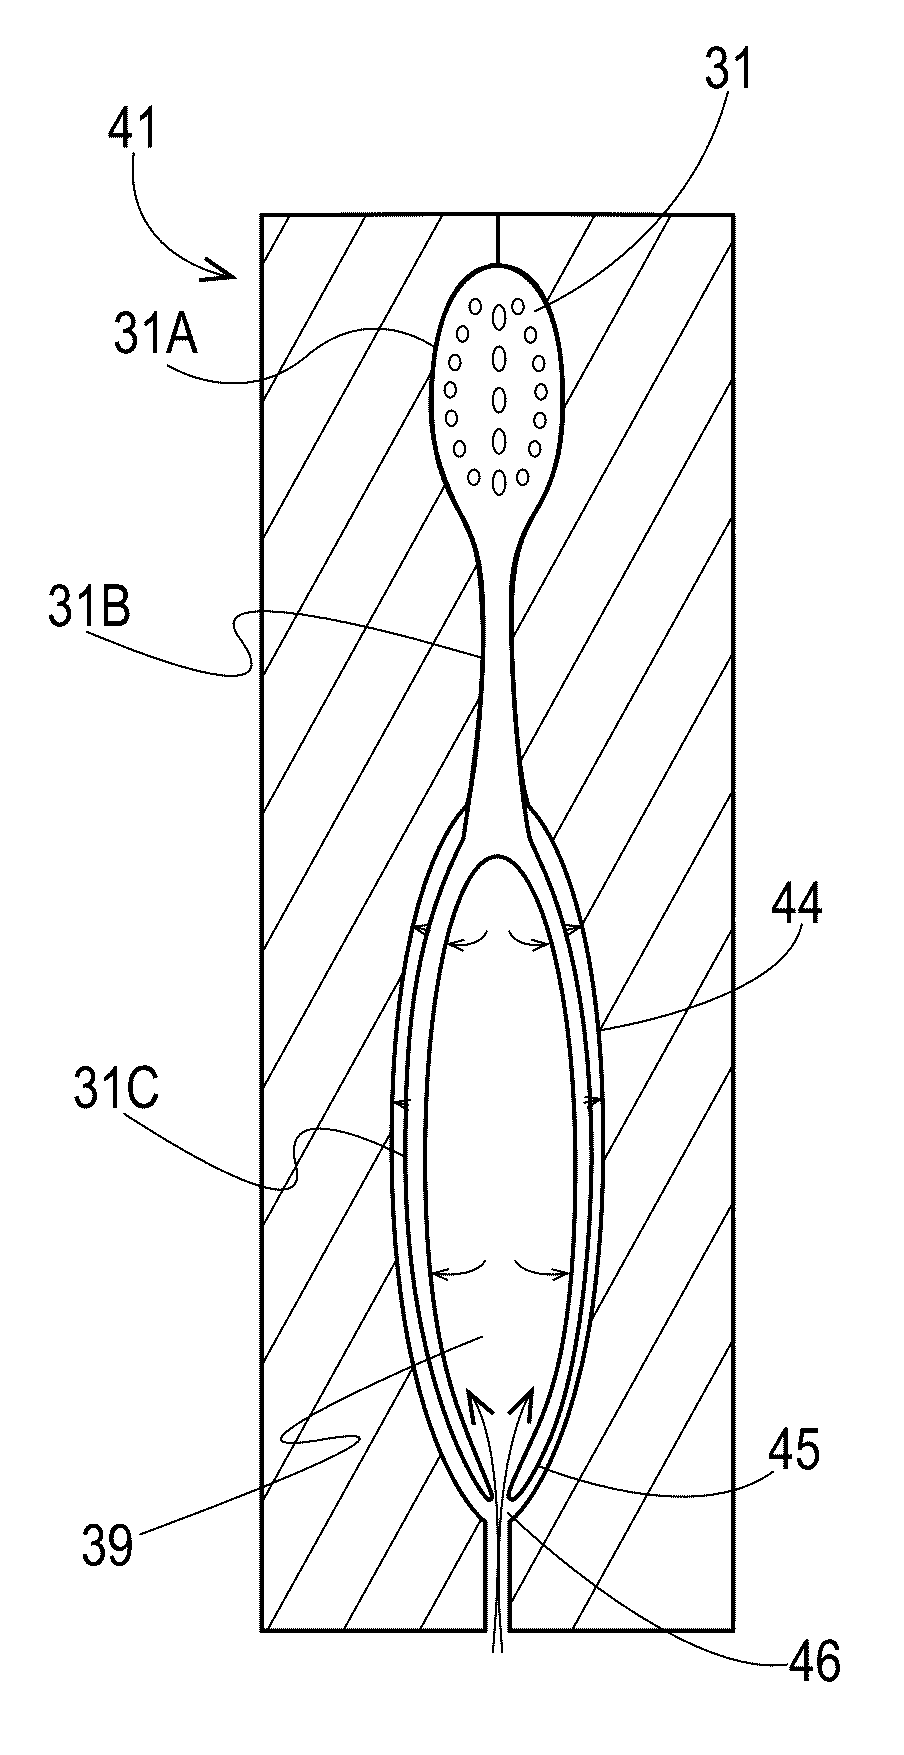 Method for producing a toothbrush having an inner cavity